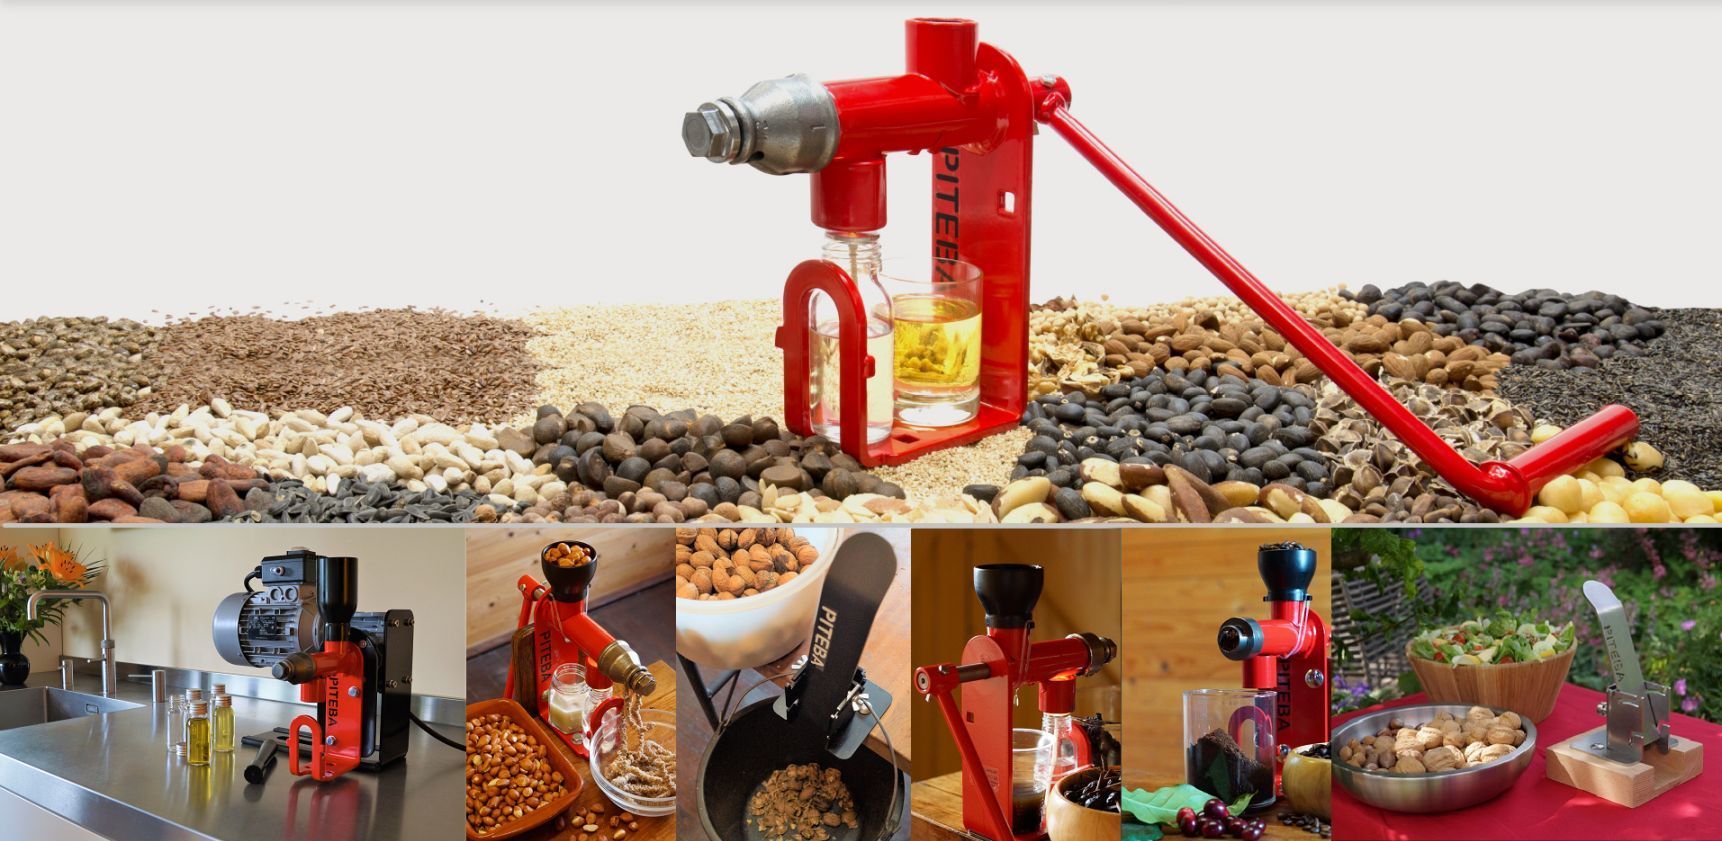 Oil press for homemade oil, manual and electric. Nutcracker for large quantities